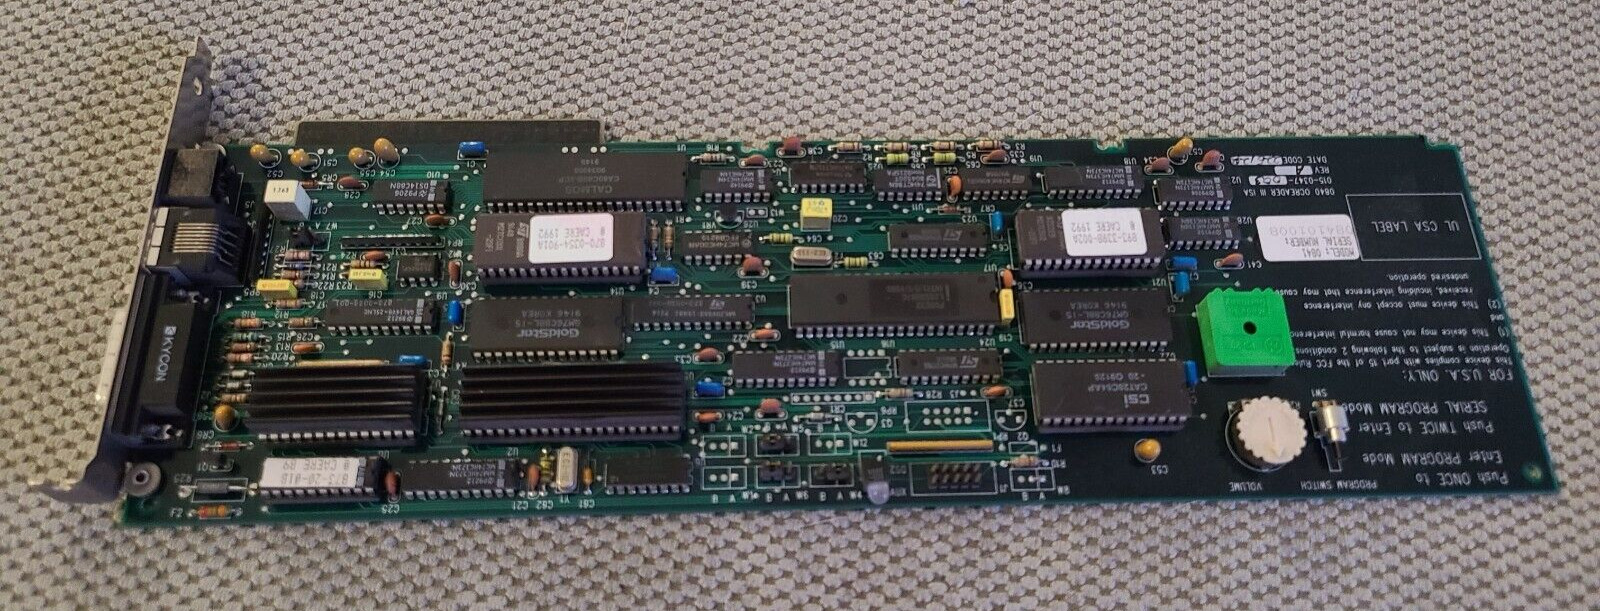 Vintage 1992 Caere Optical Character Reader Control Board